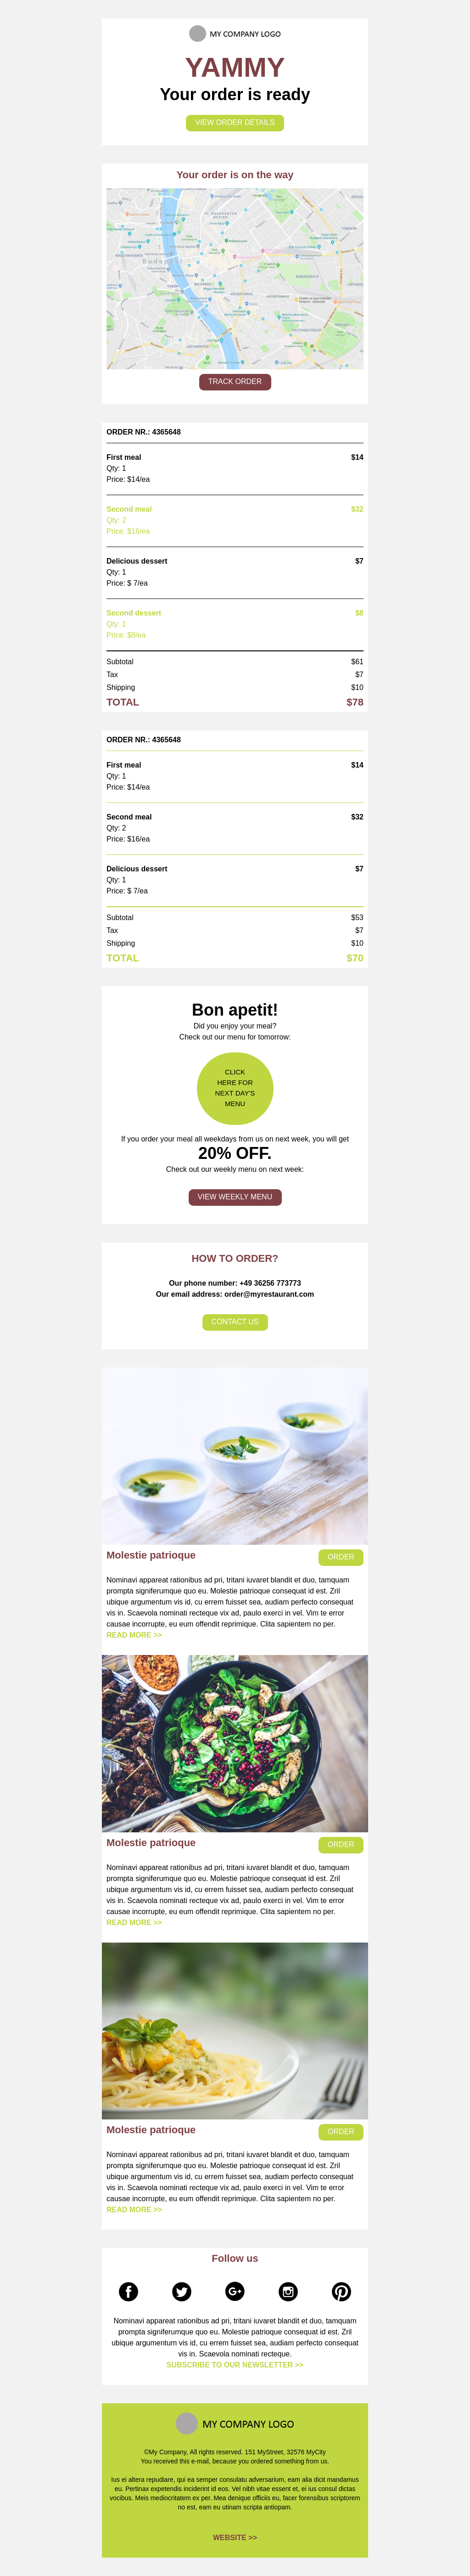 Food Delivery Order Confirmation Email Template